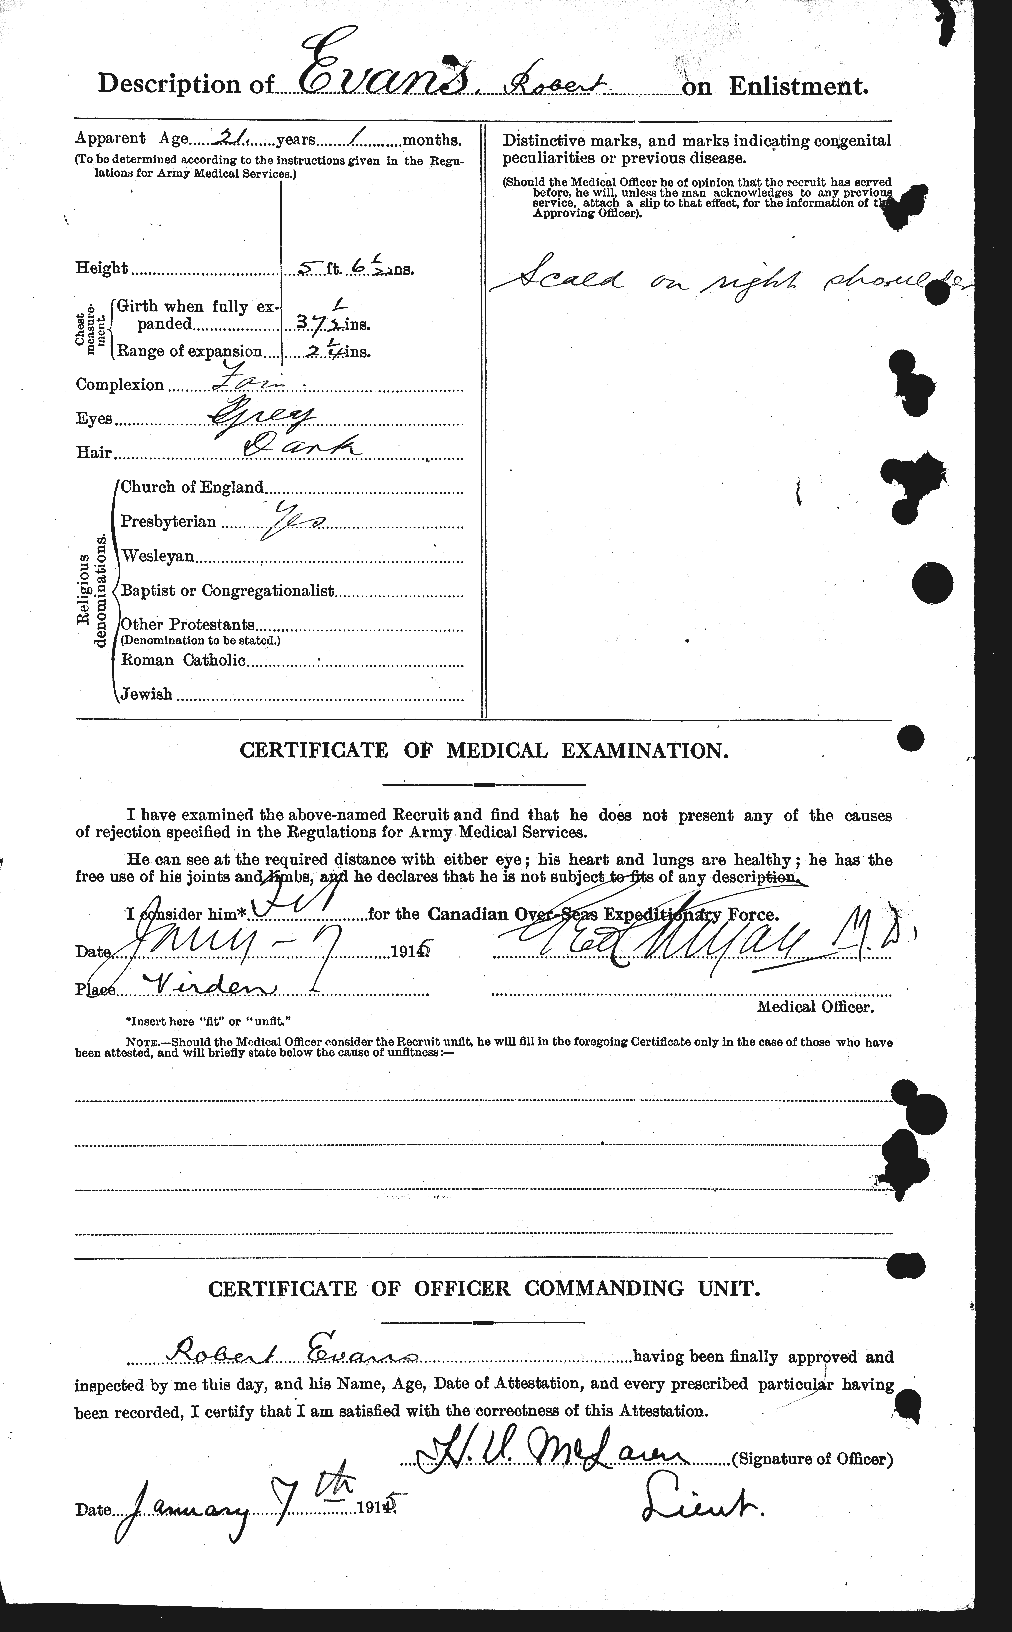 Personnel Records of the First World War - CEF 313285b